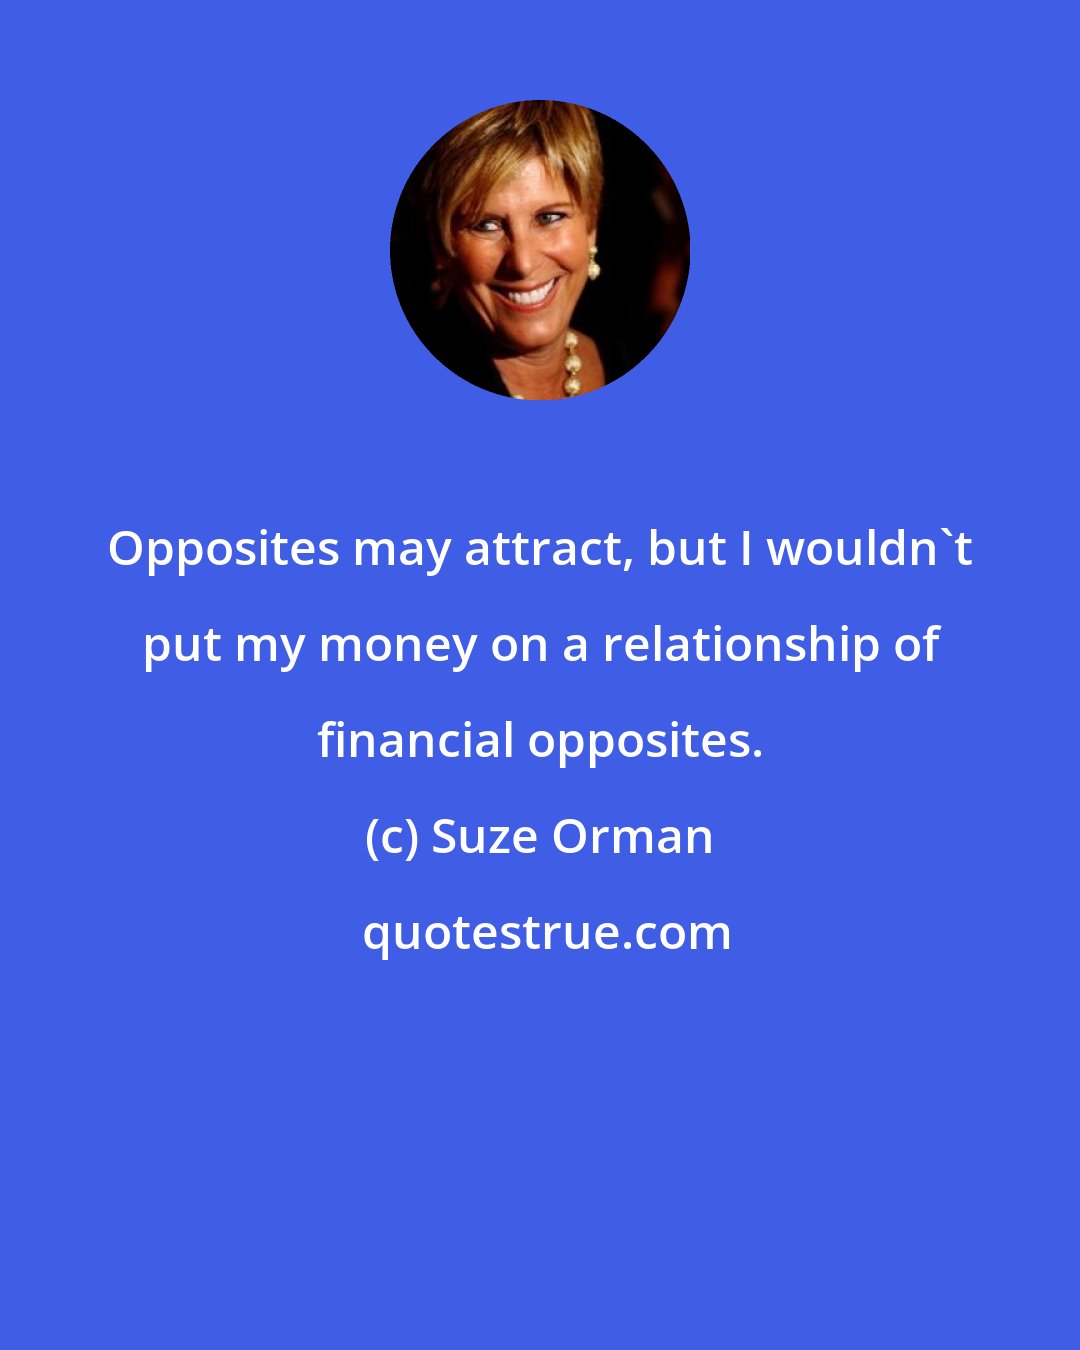 Suze Orman: Opposites may attract, but I wouldn't put my money on a relationship of financial opposites.